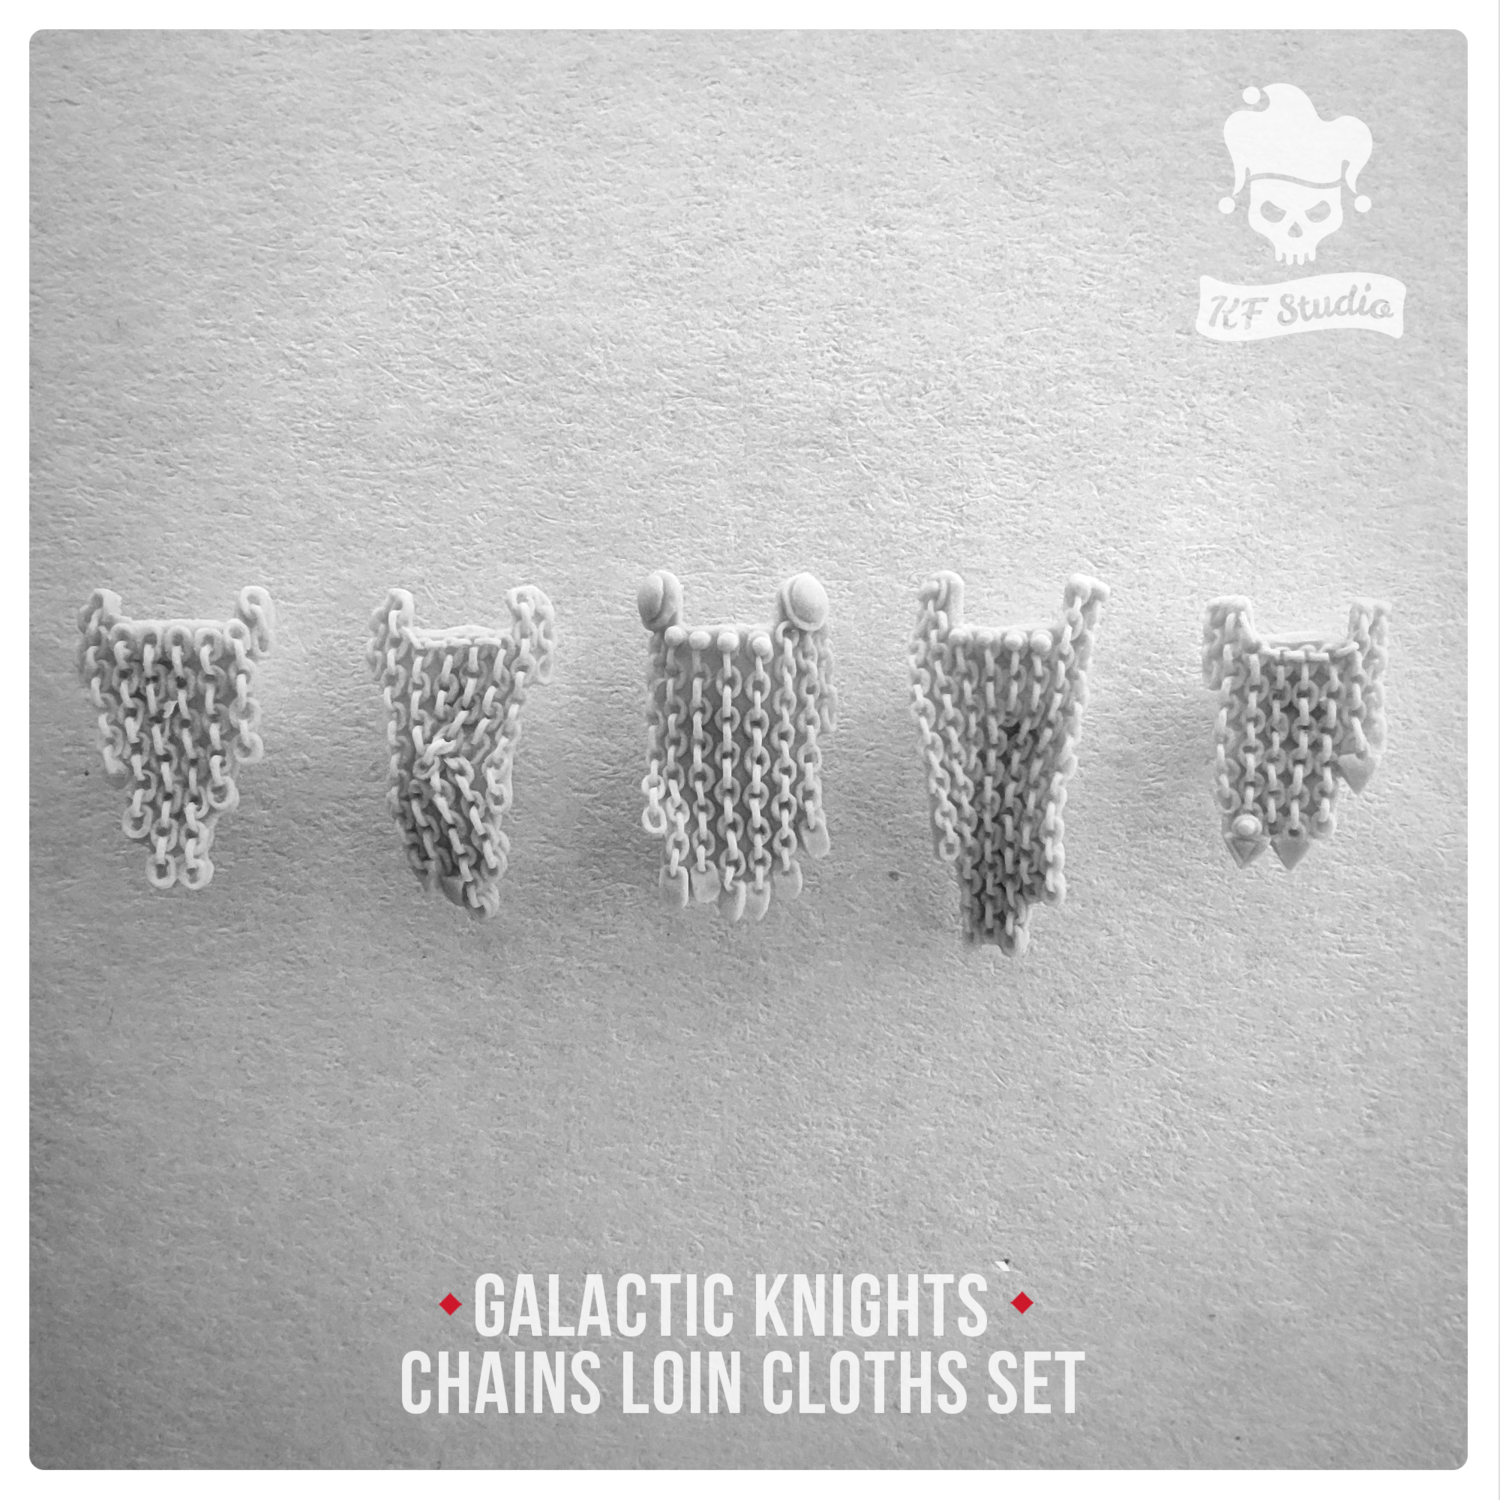 Galactic Knights Chain Loin cloths Set#2 by KFStudio